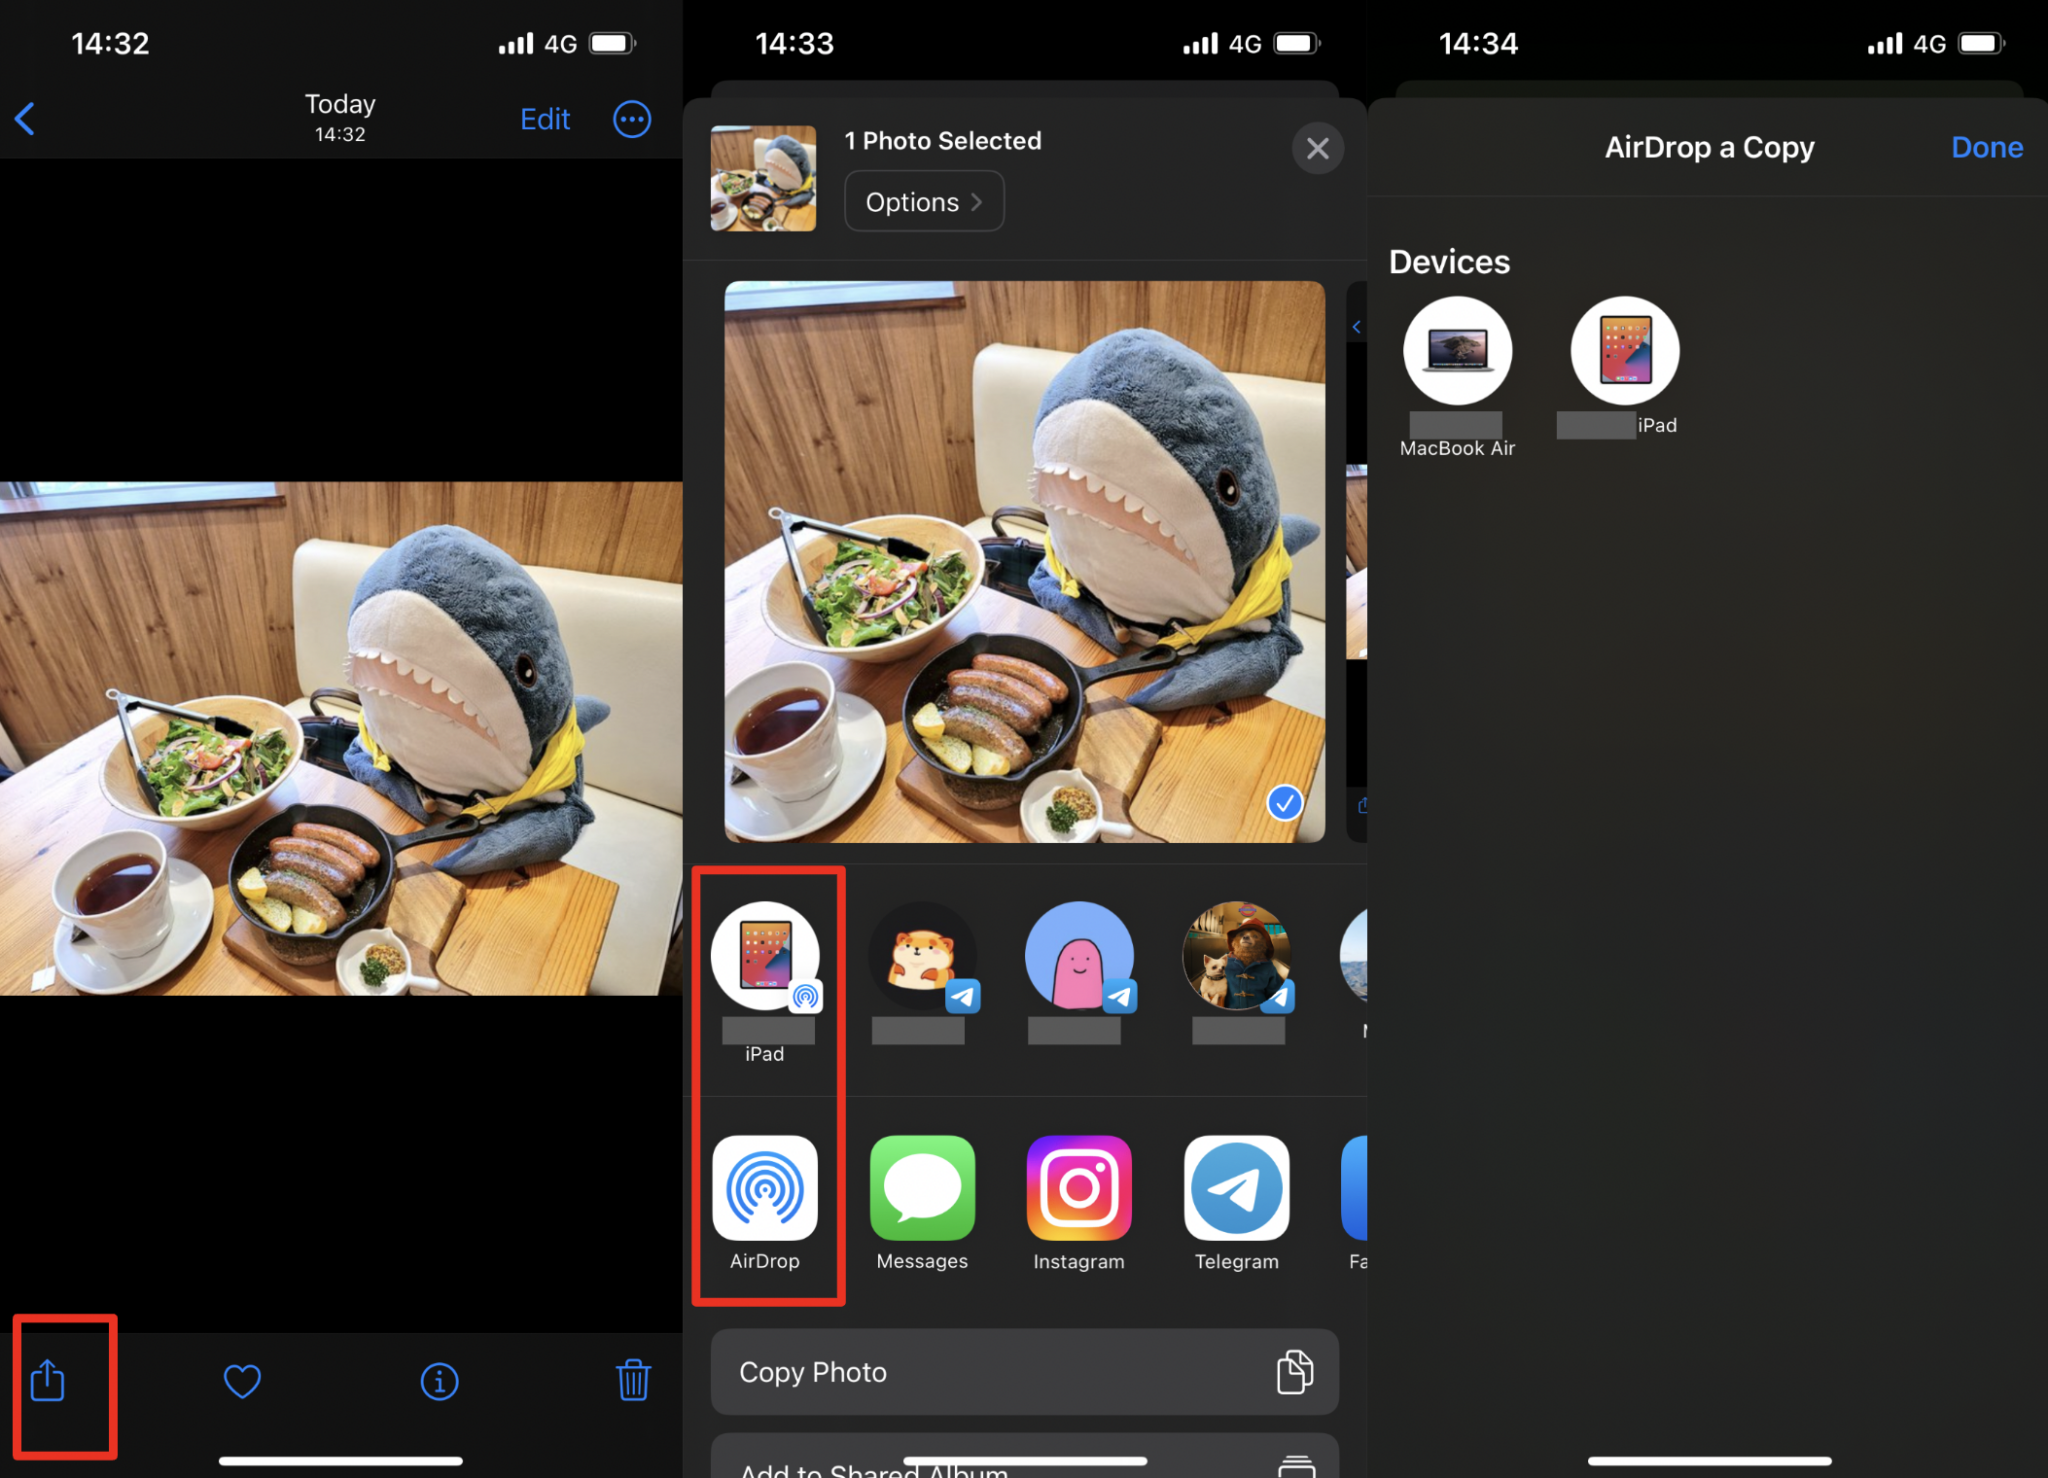 Step-by-step screenshots on how to use AirDrop